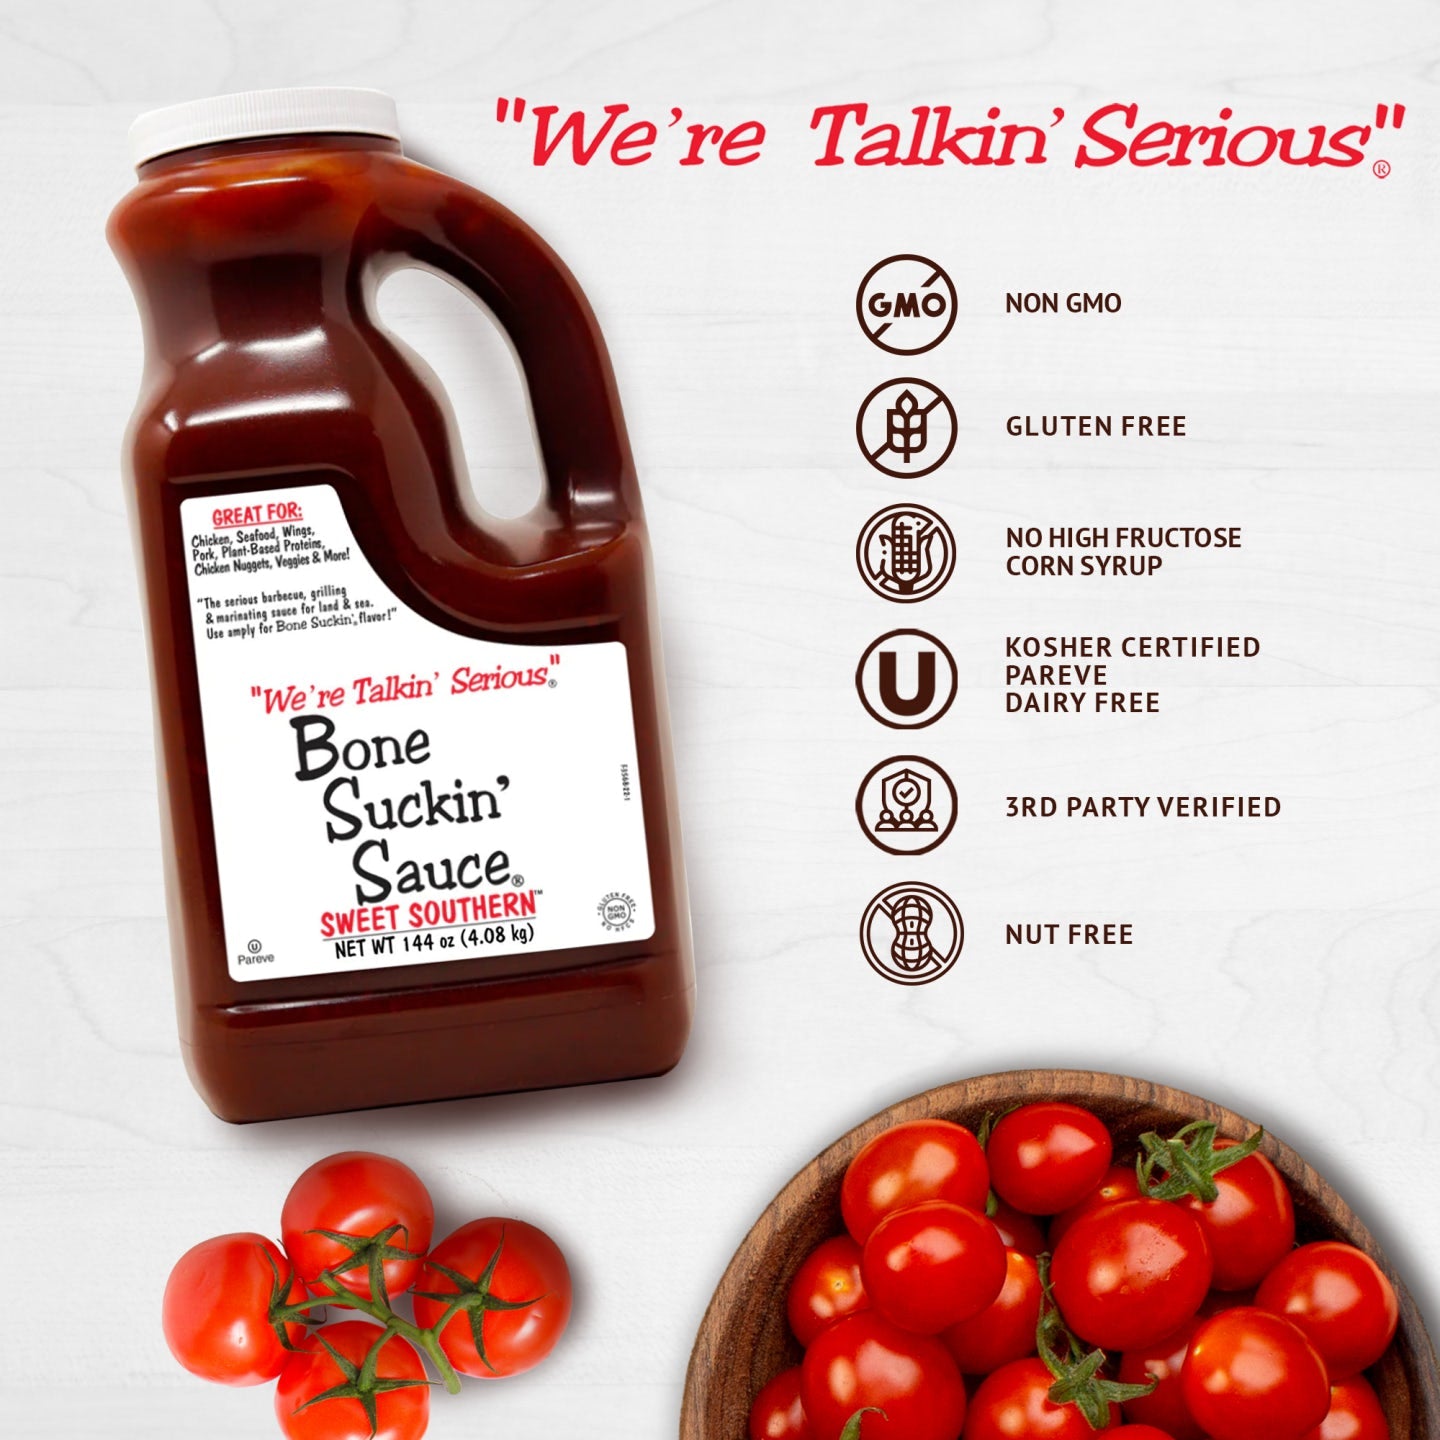 Bone Suckin' Sauce® 144 oz. is Non GMO, gluten free, no high fructose corn syrup, kosher certified, pareve dairy free, 3rd party verified, and nut free